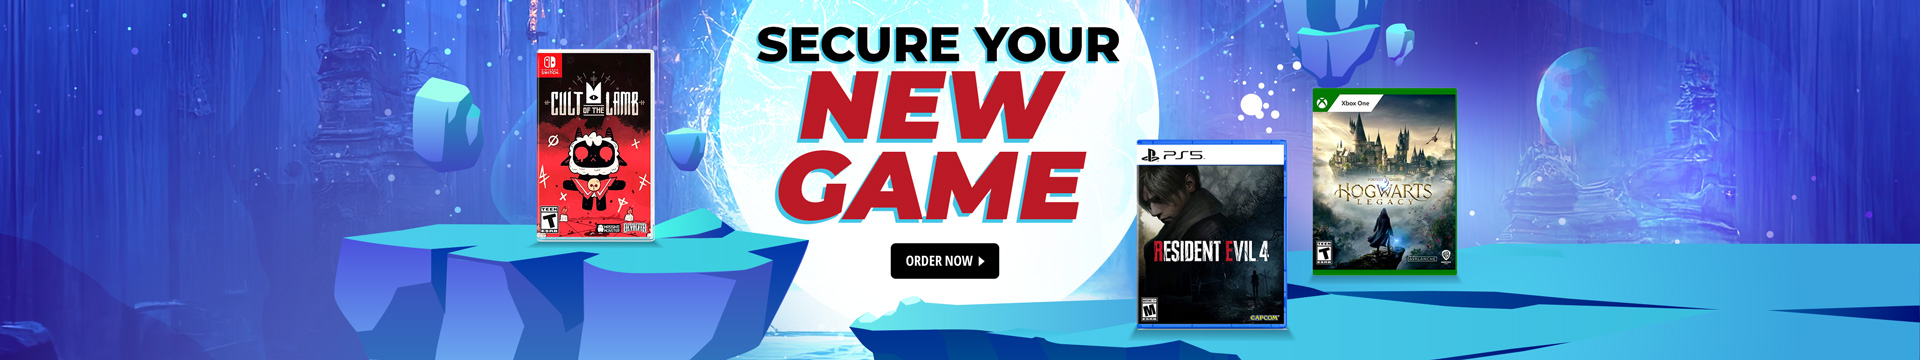 Secure Your New Game